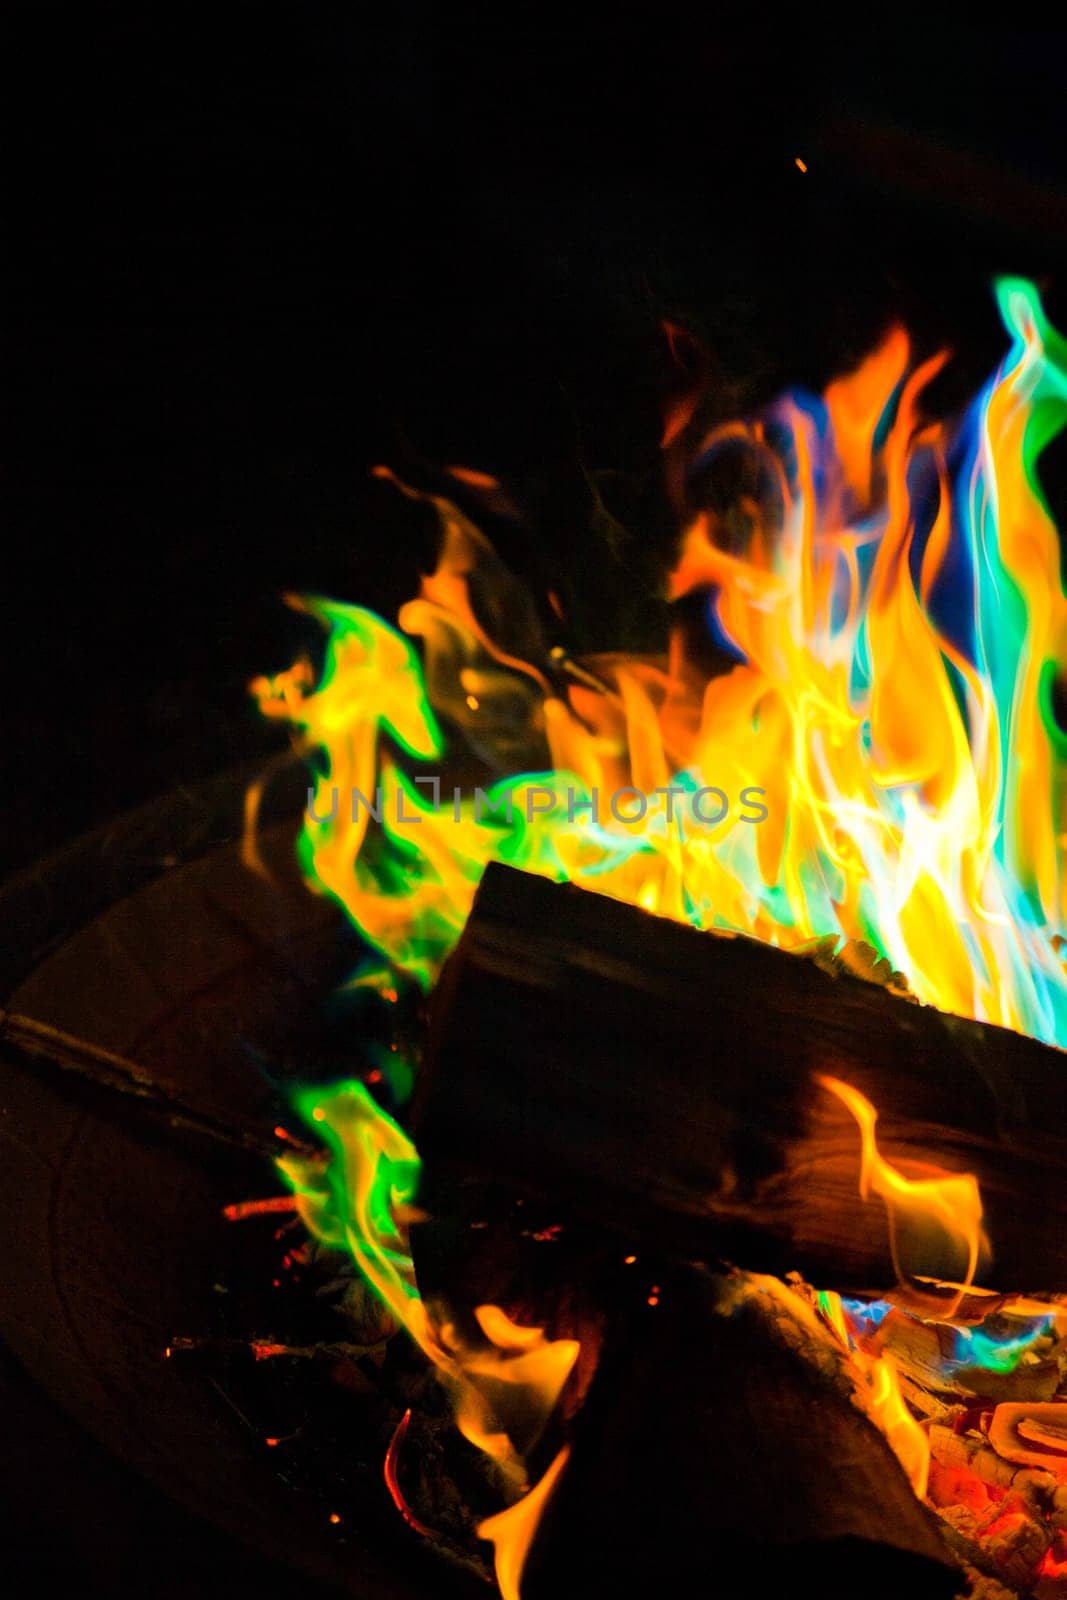 Vibrant Multicolored Campfire Flames in Outdoor Setting close-up silhouette by njproductions